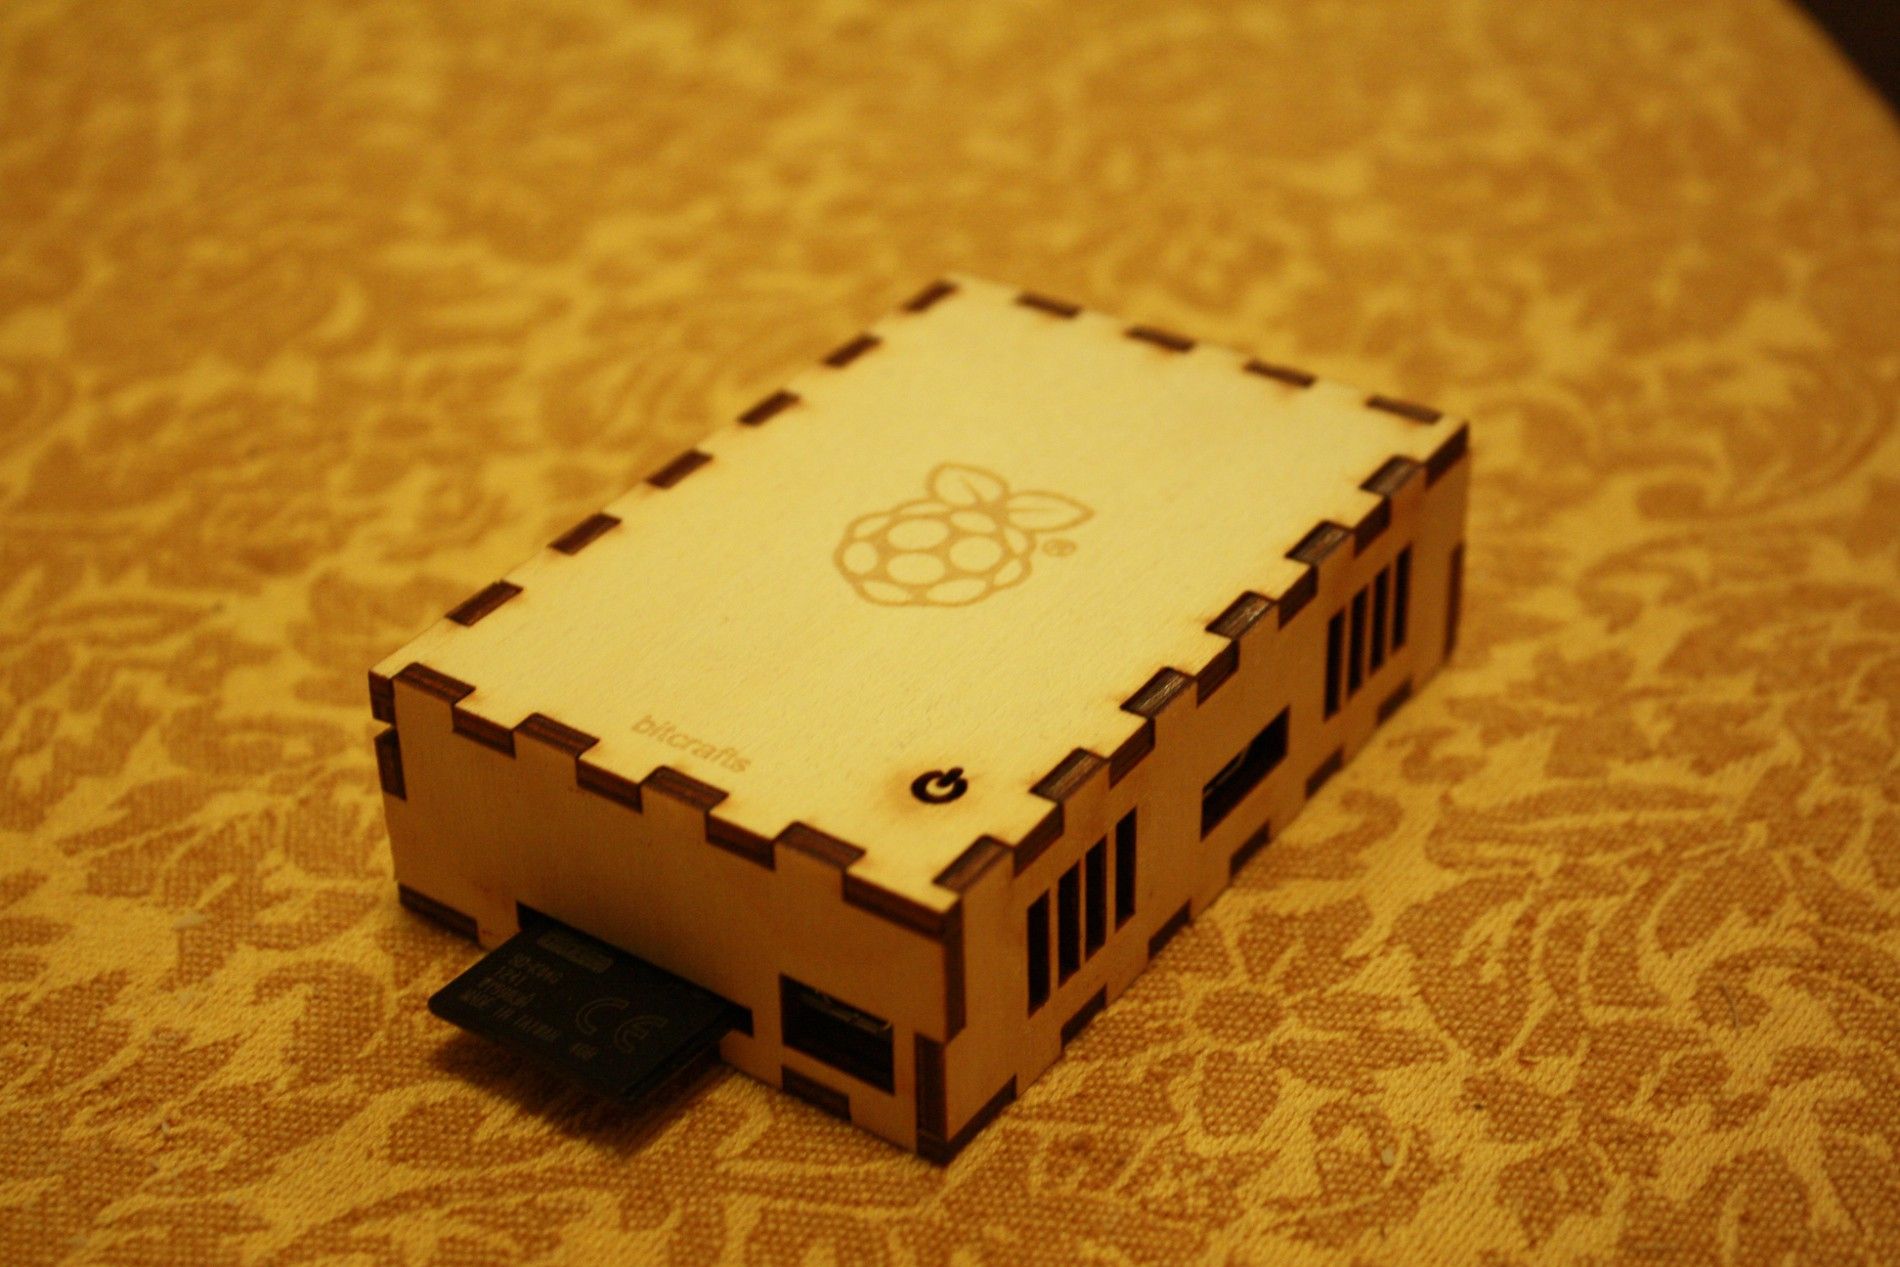 A Raspberry Pi Case with an sd card on top